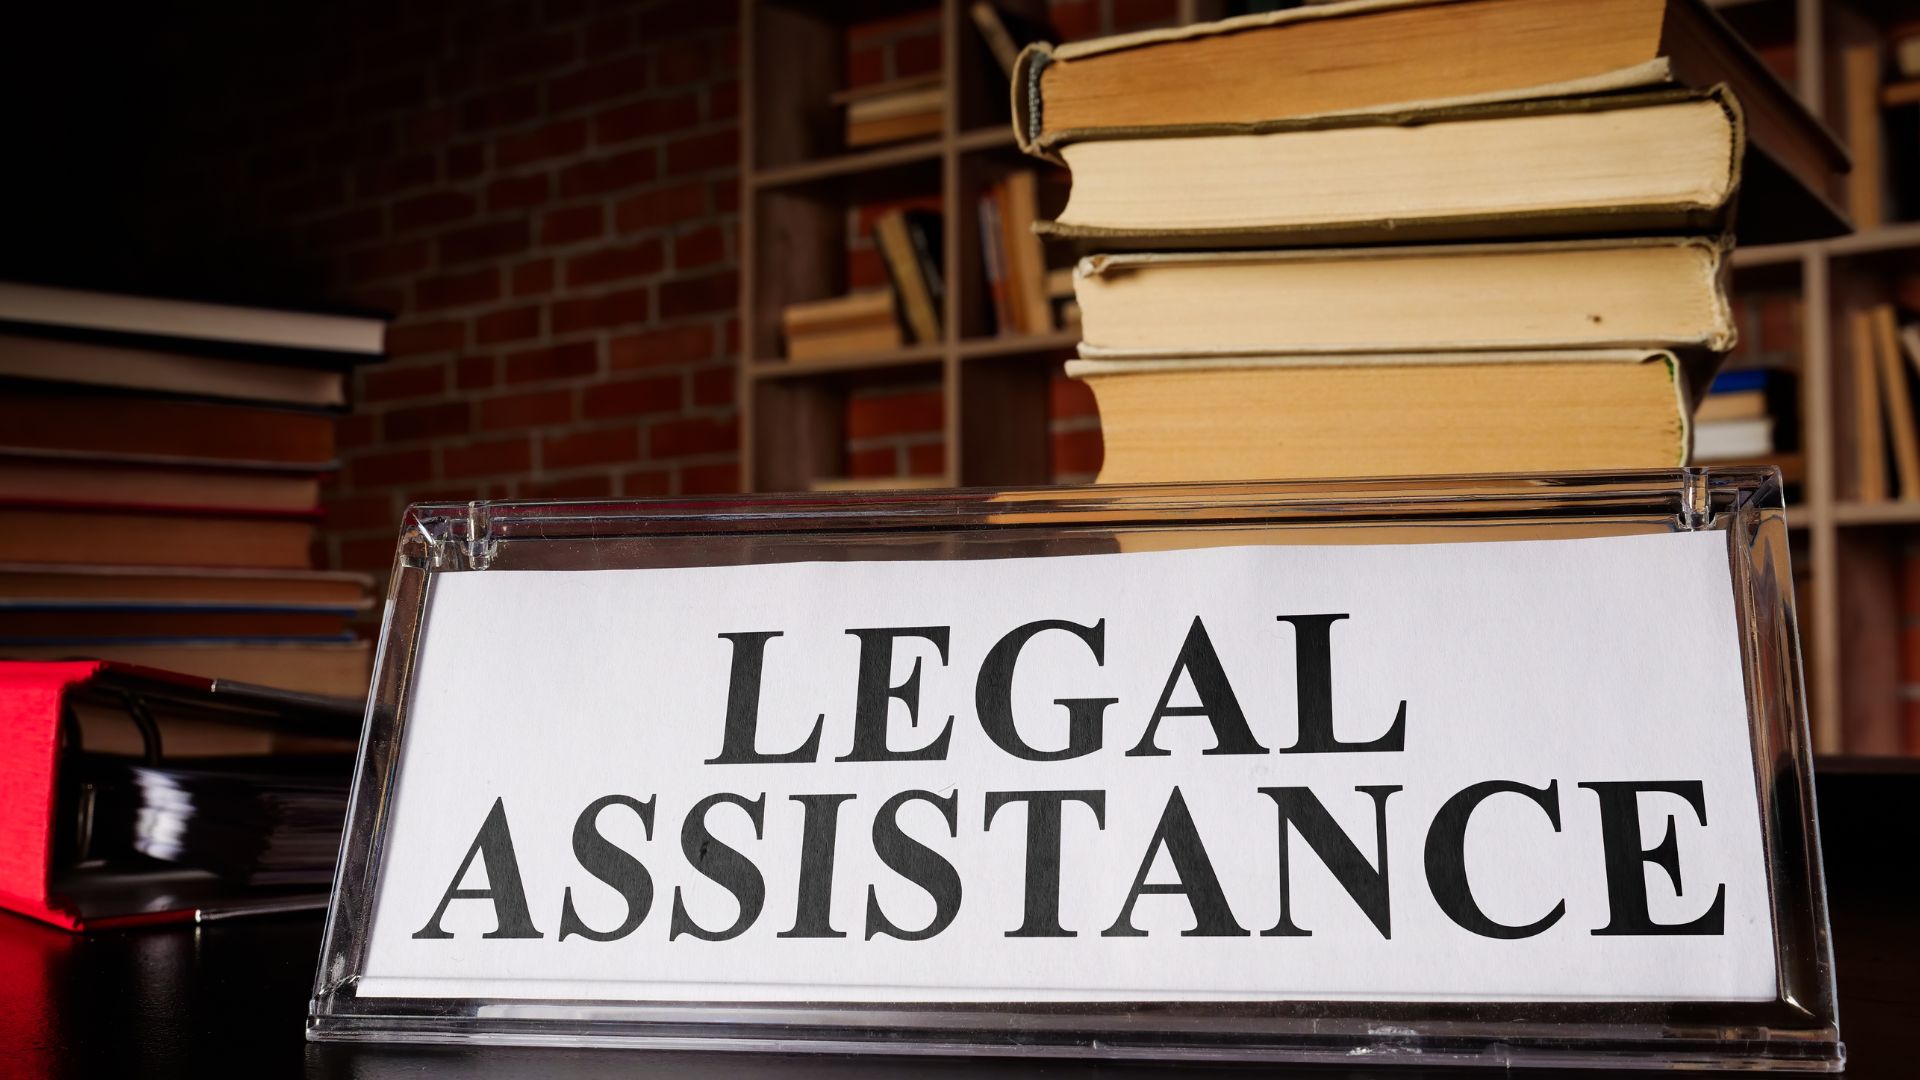 Free legal assistance